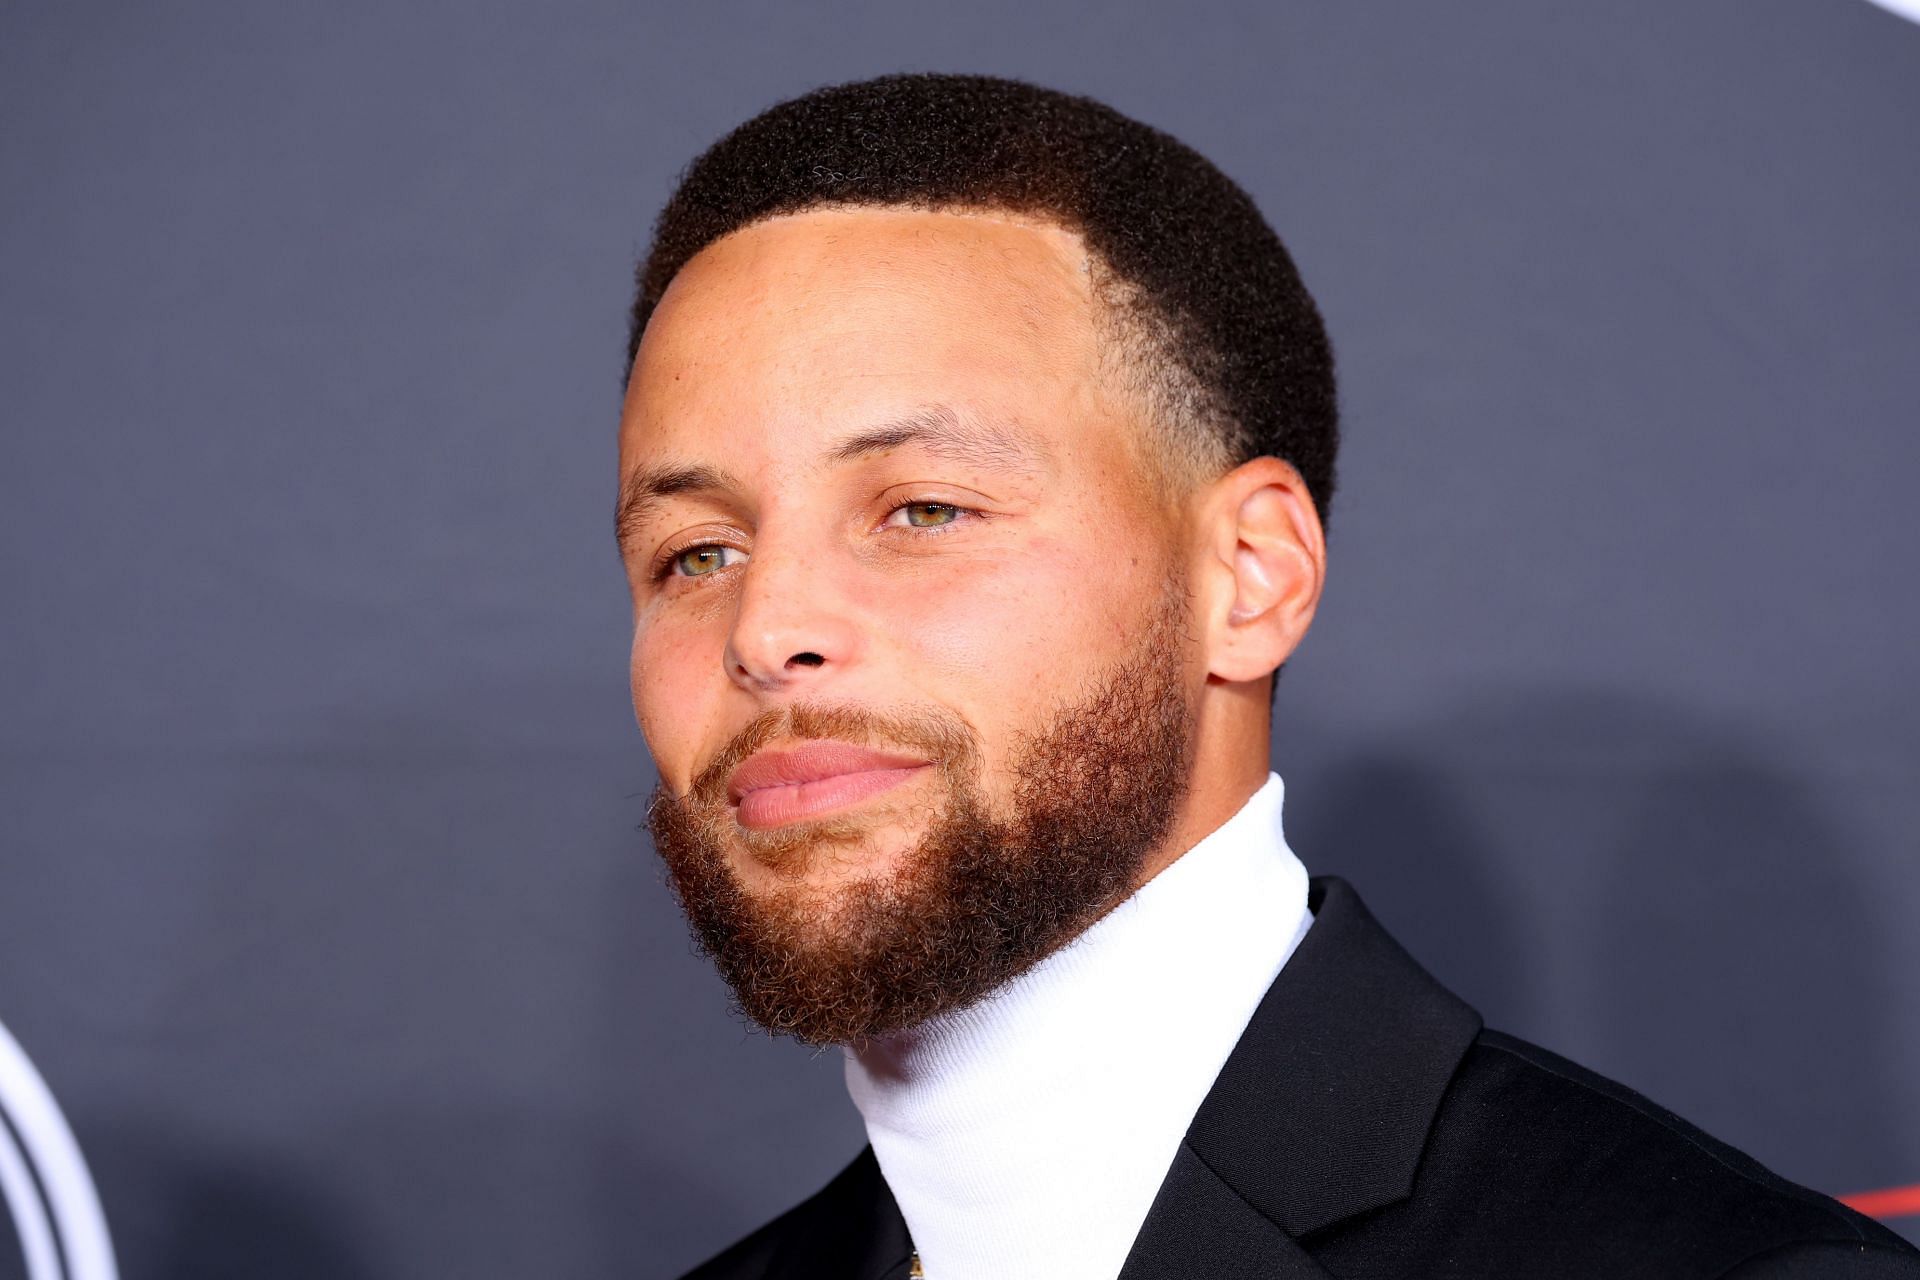 Steph Curry at the 2022 ESPY Awards.